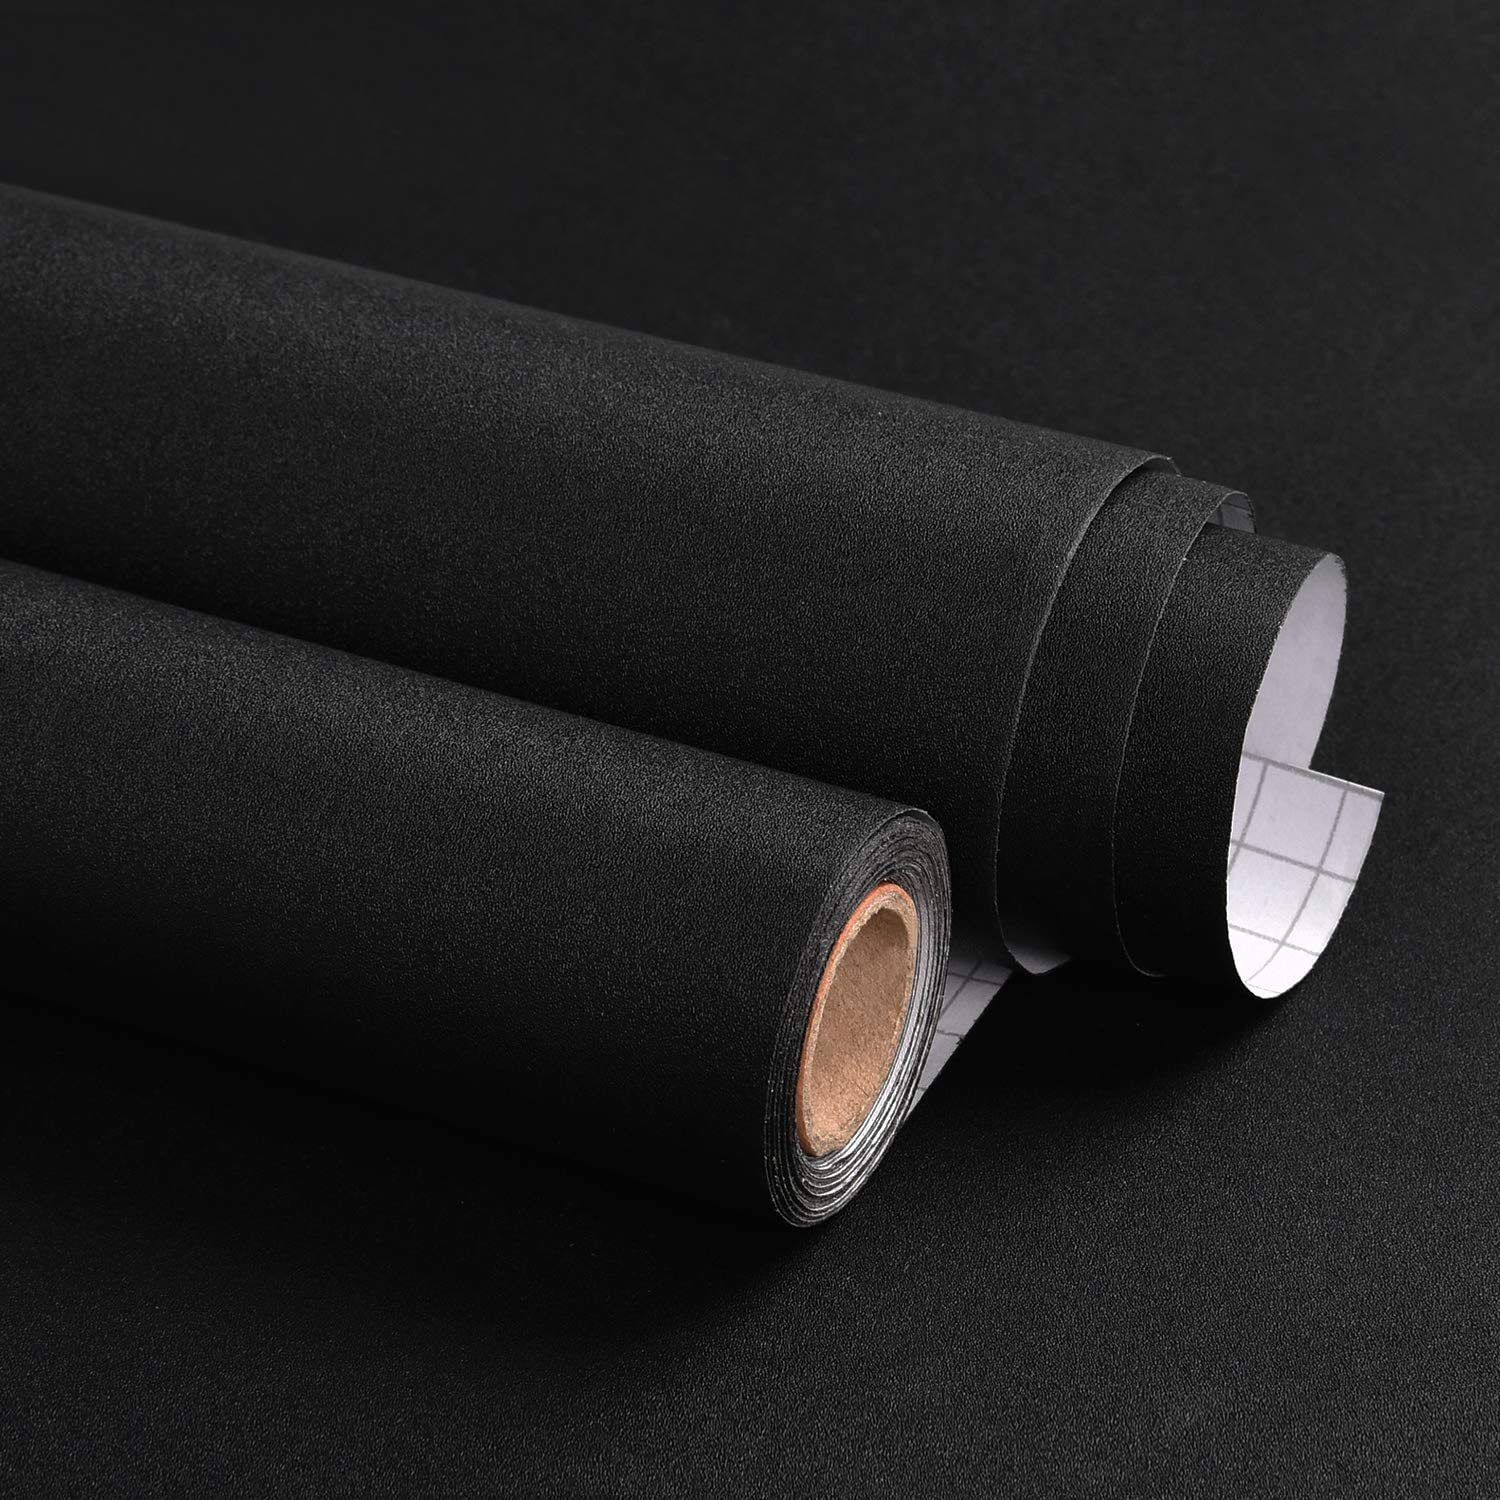 Matte Black Wallpaper Vinyl Self Adhesive Shelf Liner Drawer Peel And Stick  Countertop Removable Contact Paper Wall Decoration From Yiyu_hg, $14.92